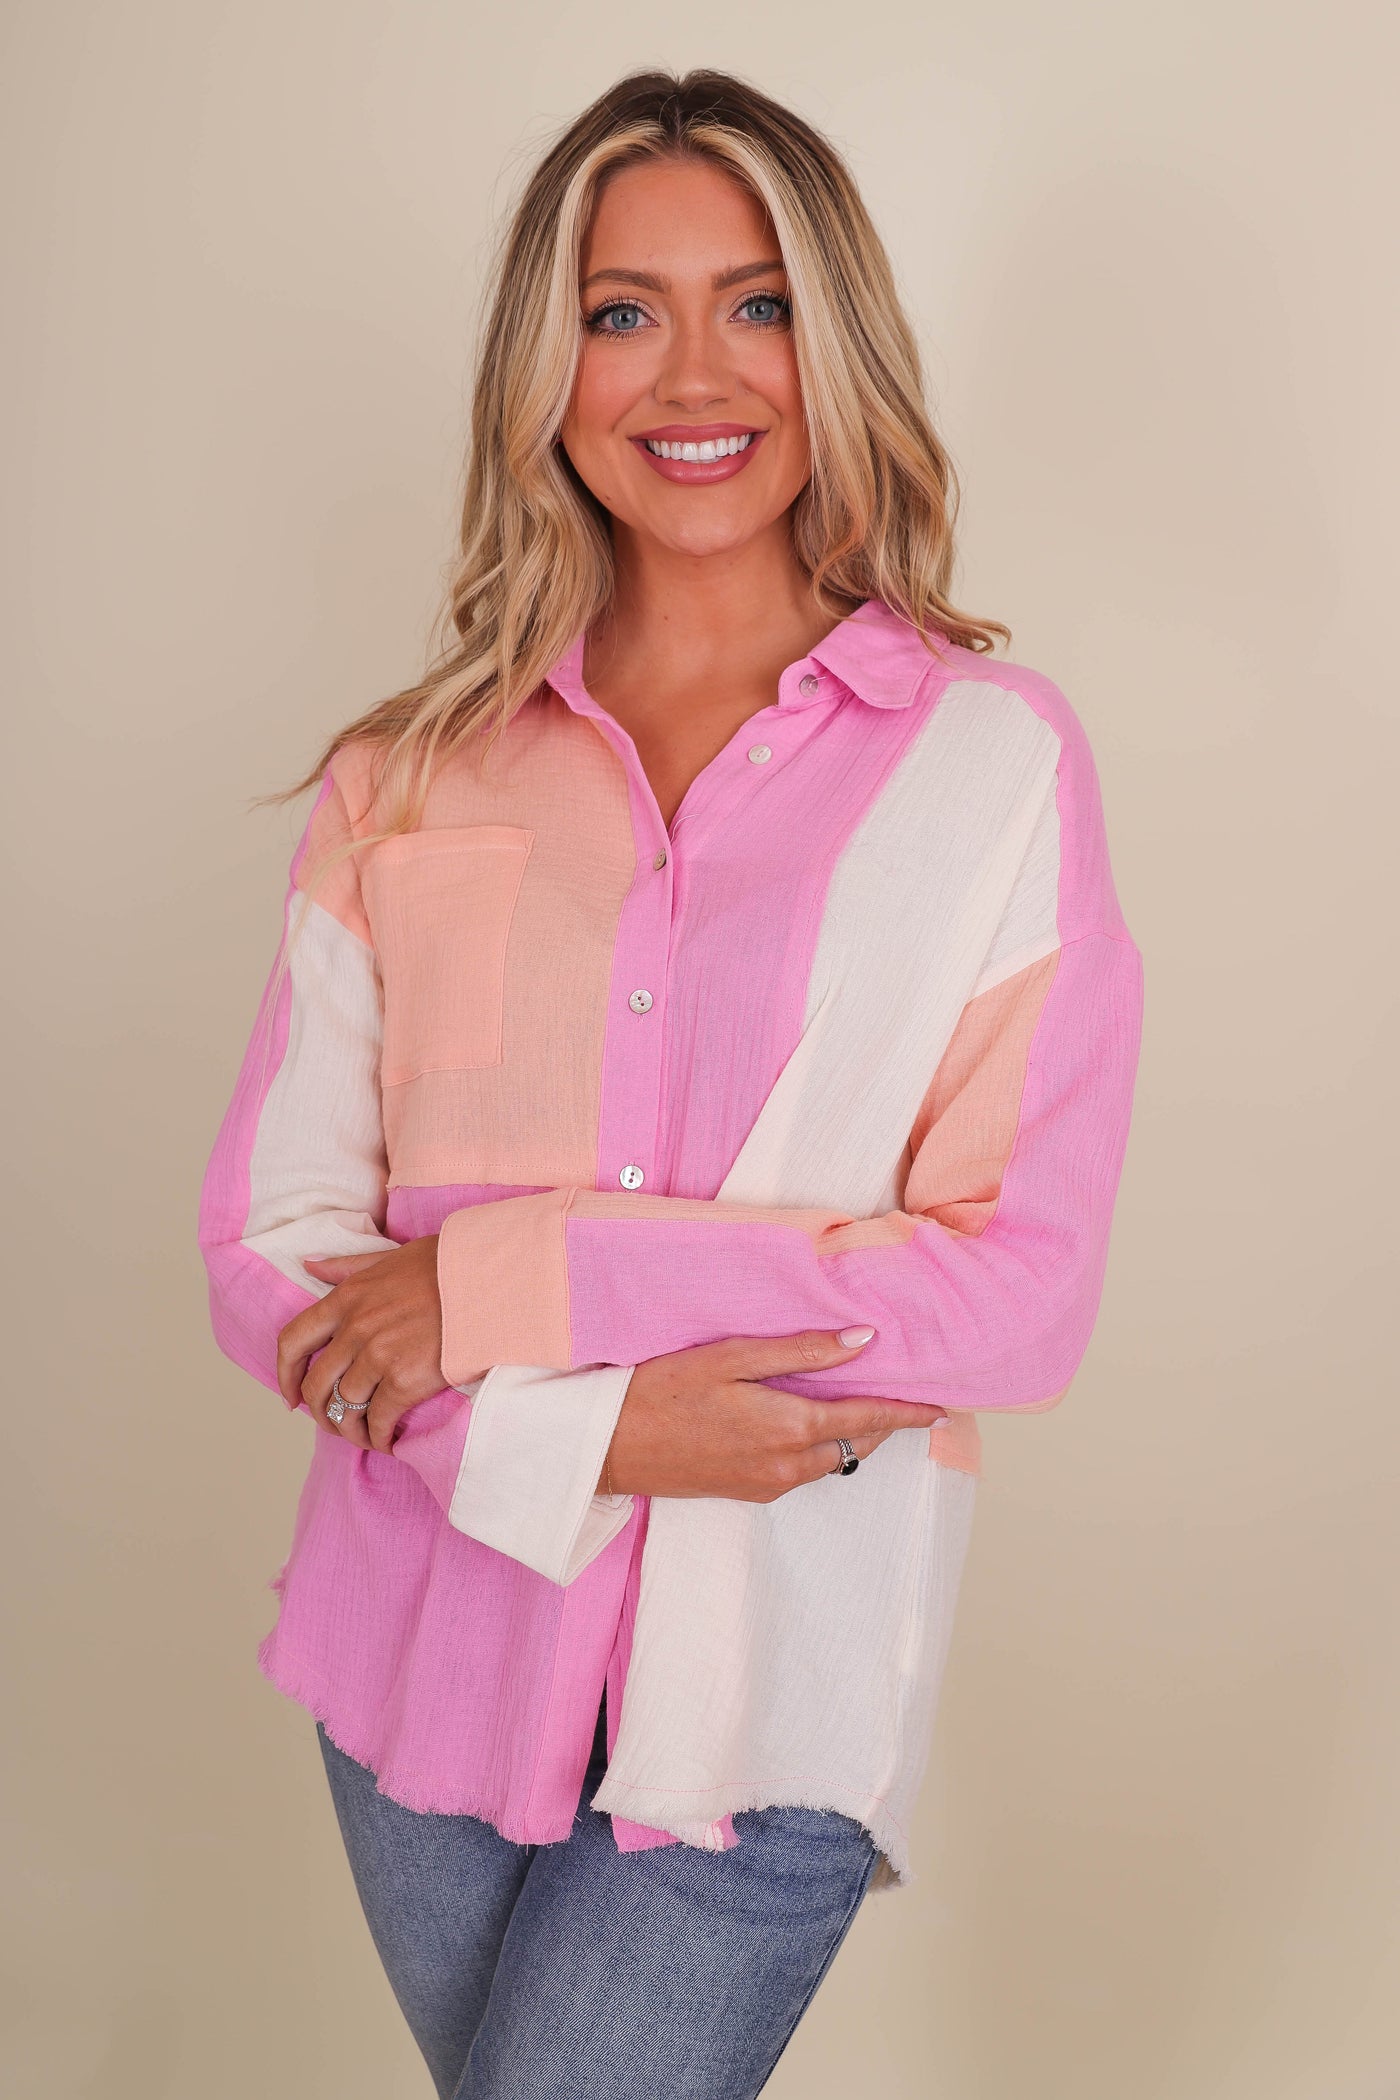 Women's Cotton Button Down- Women's Relaxed Fit Button Down- VeryJ Tops